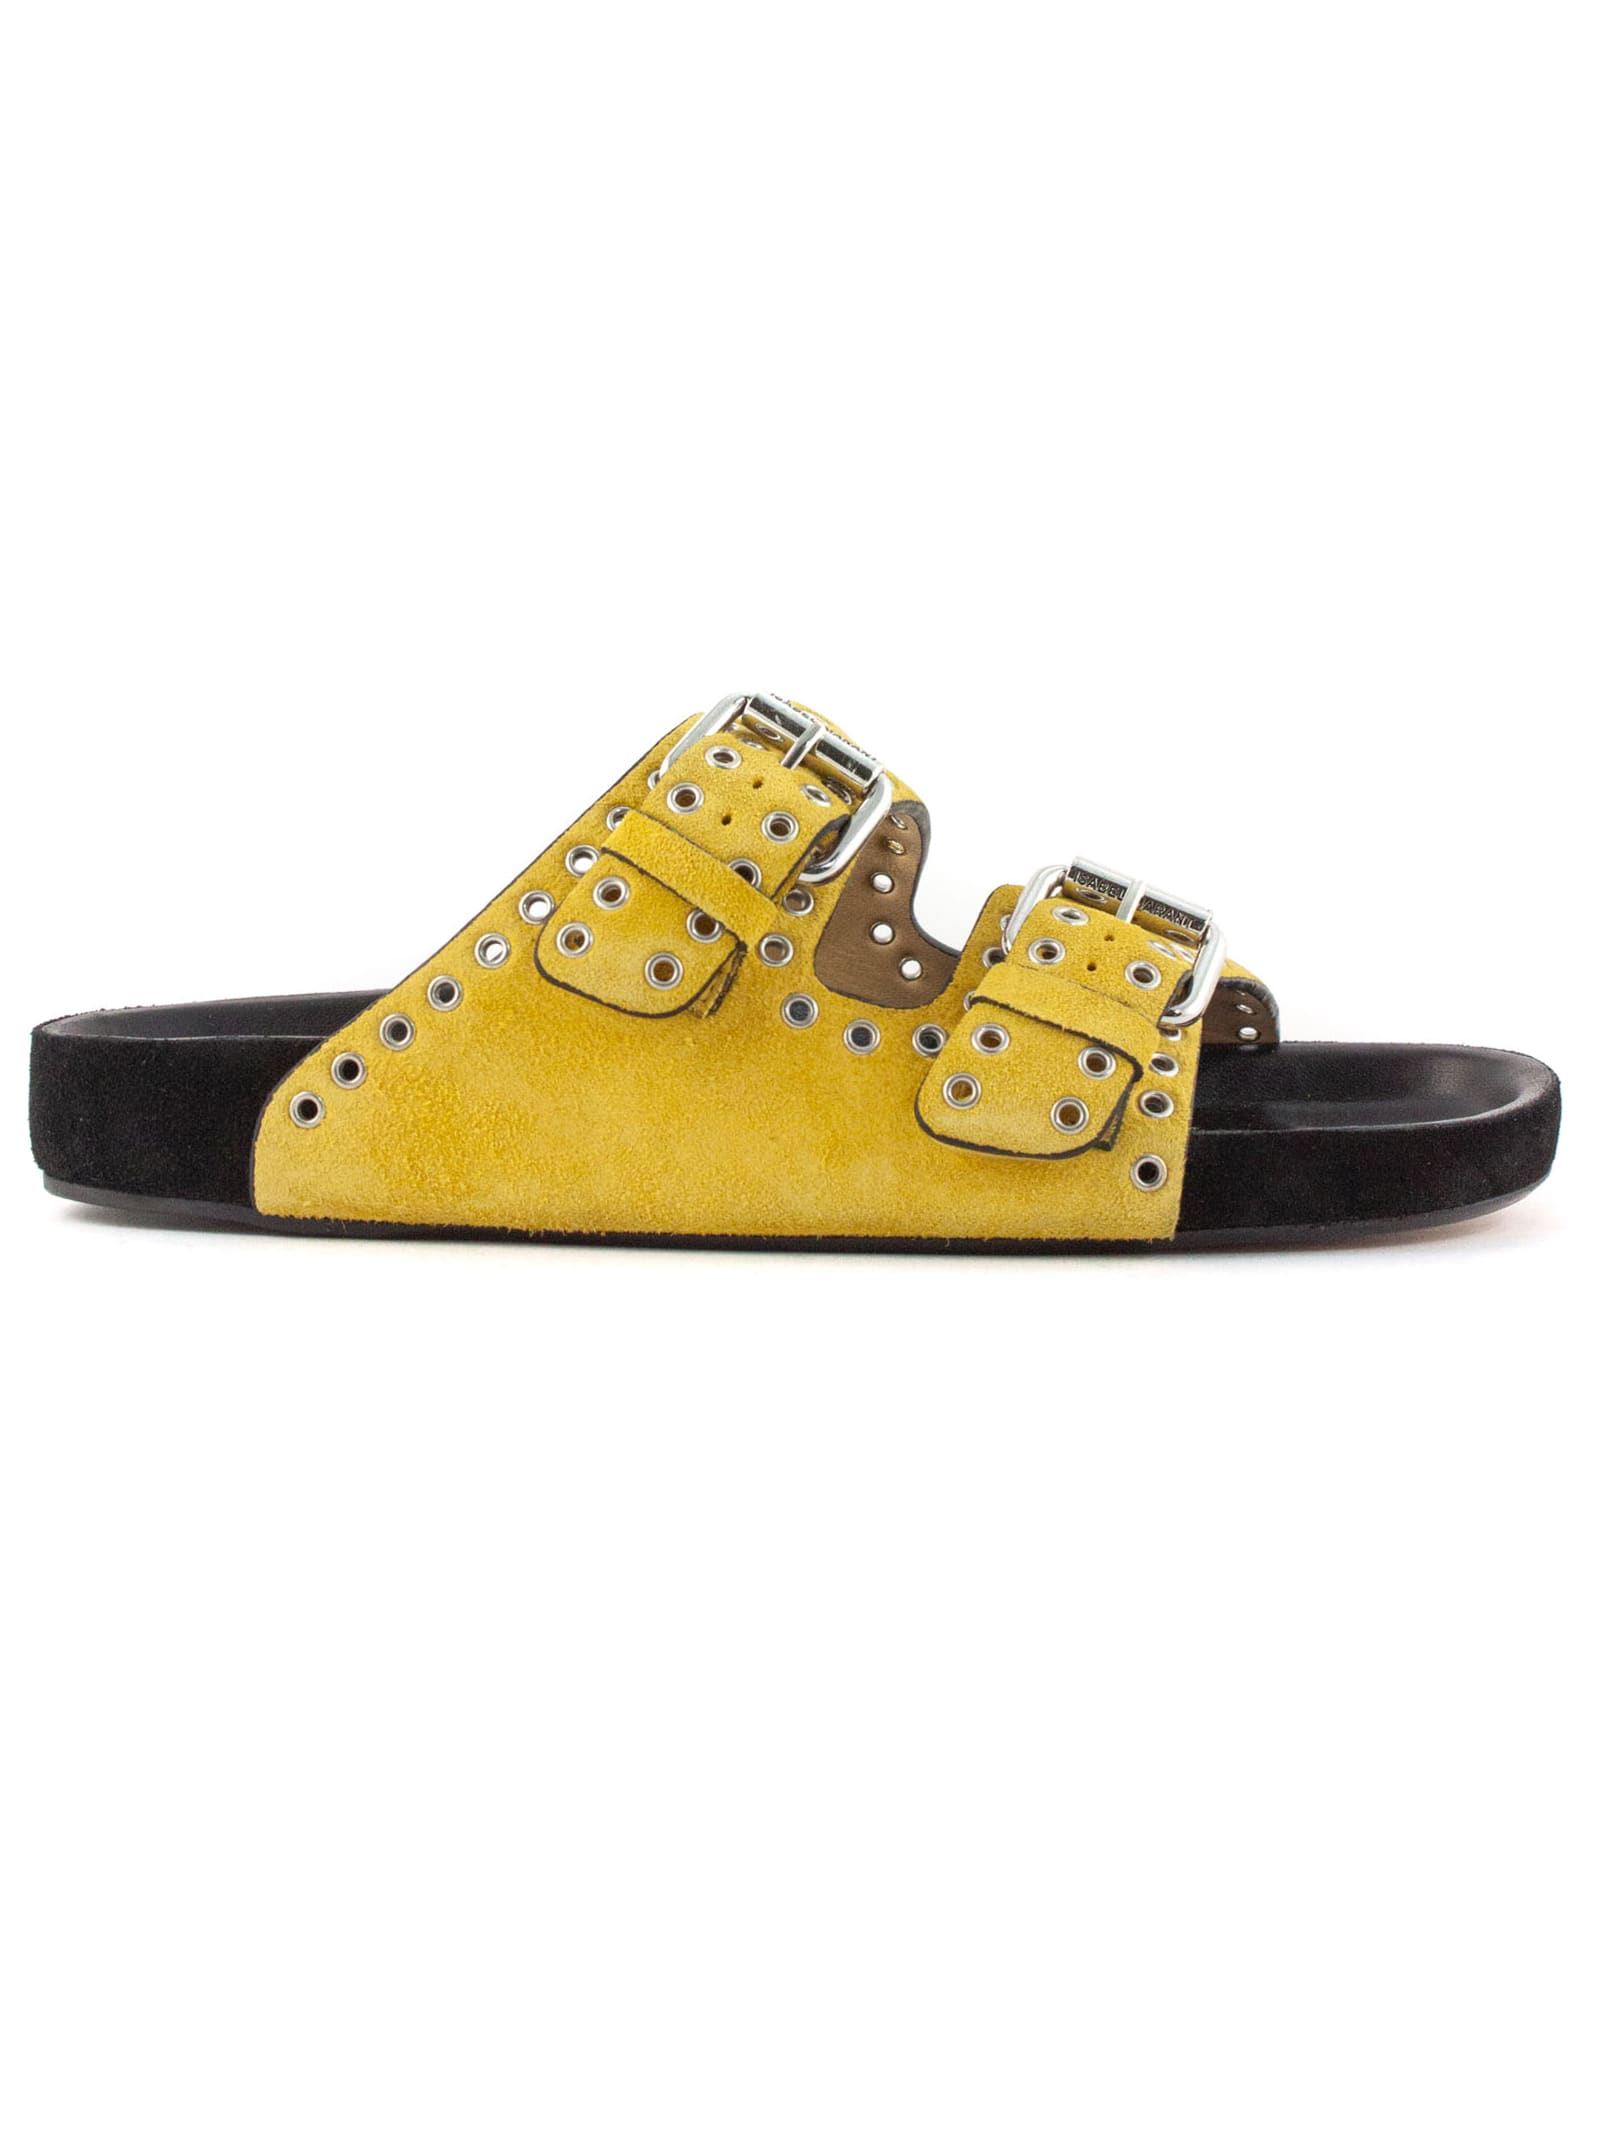 Isabel Marant Yellow Suede Sandals